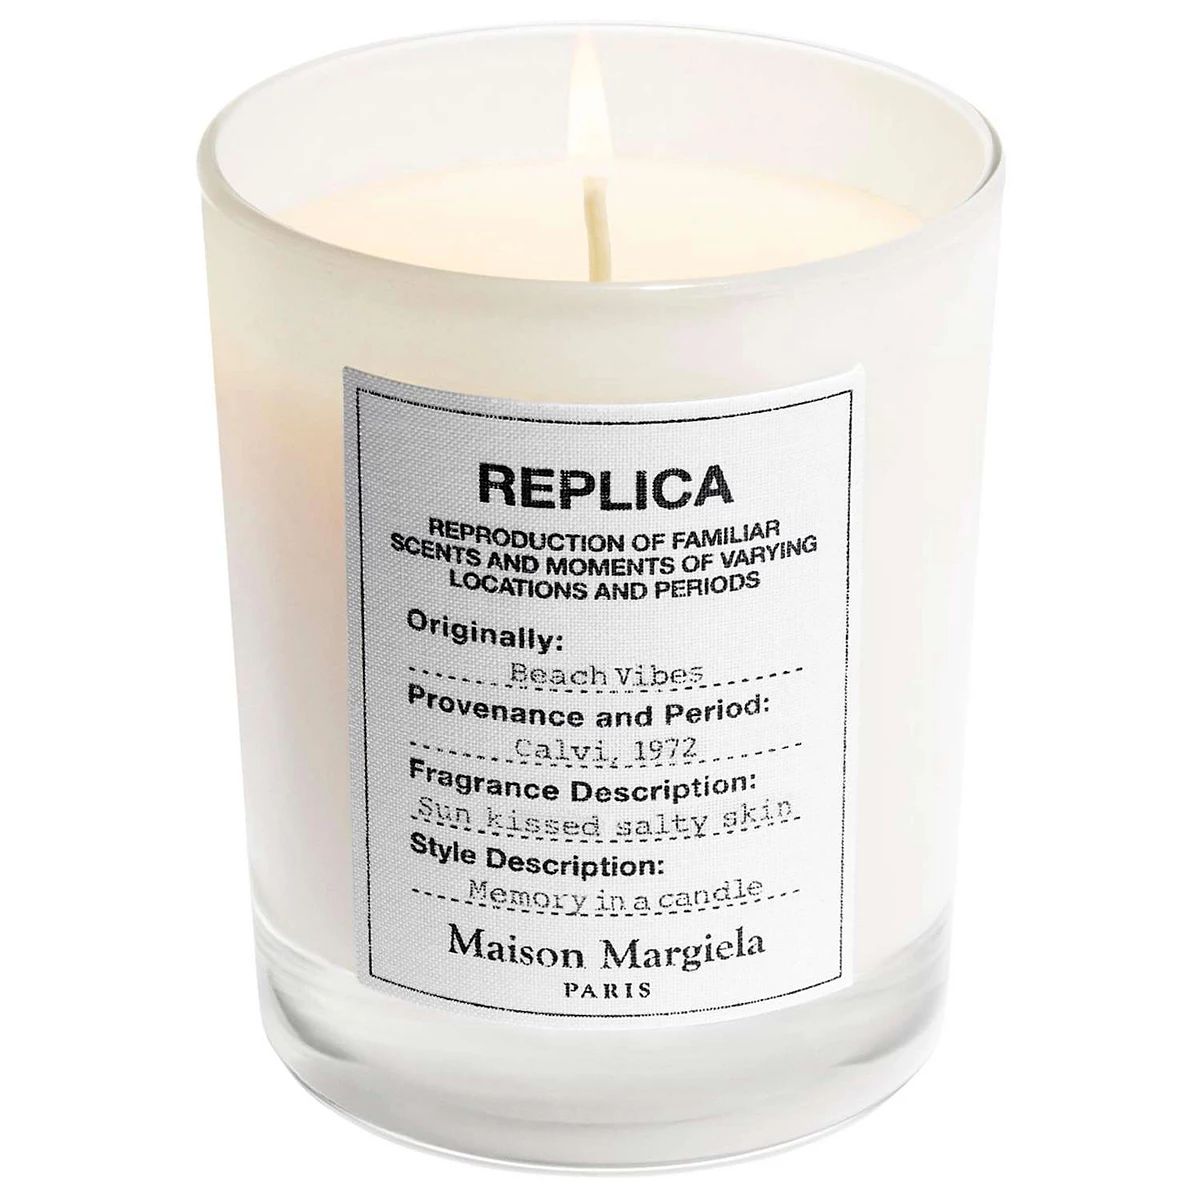 Maison Margiela 'REPLICA' Beach Vibes Scented Candle | Kohl's